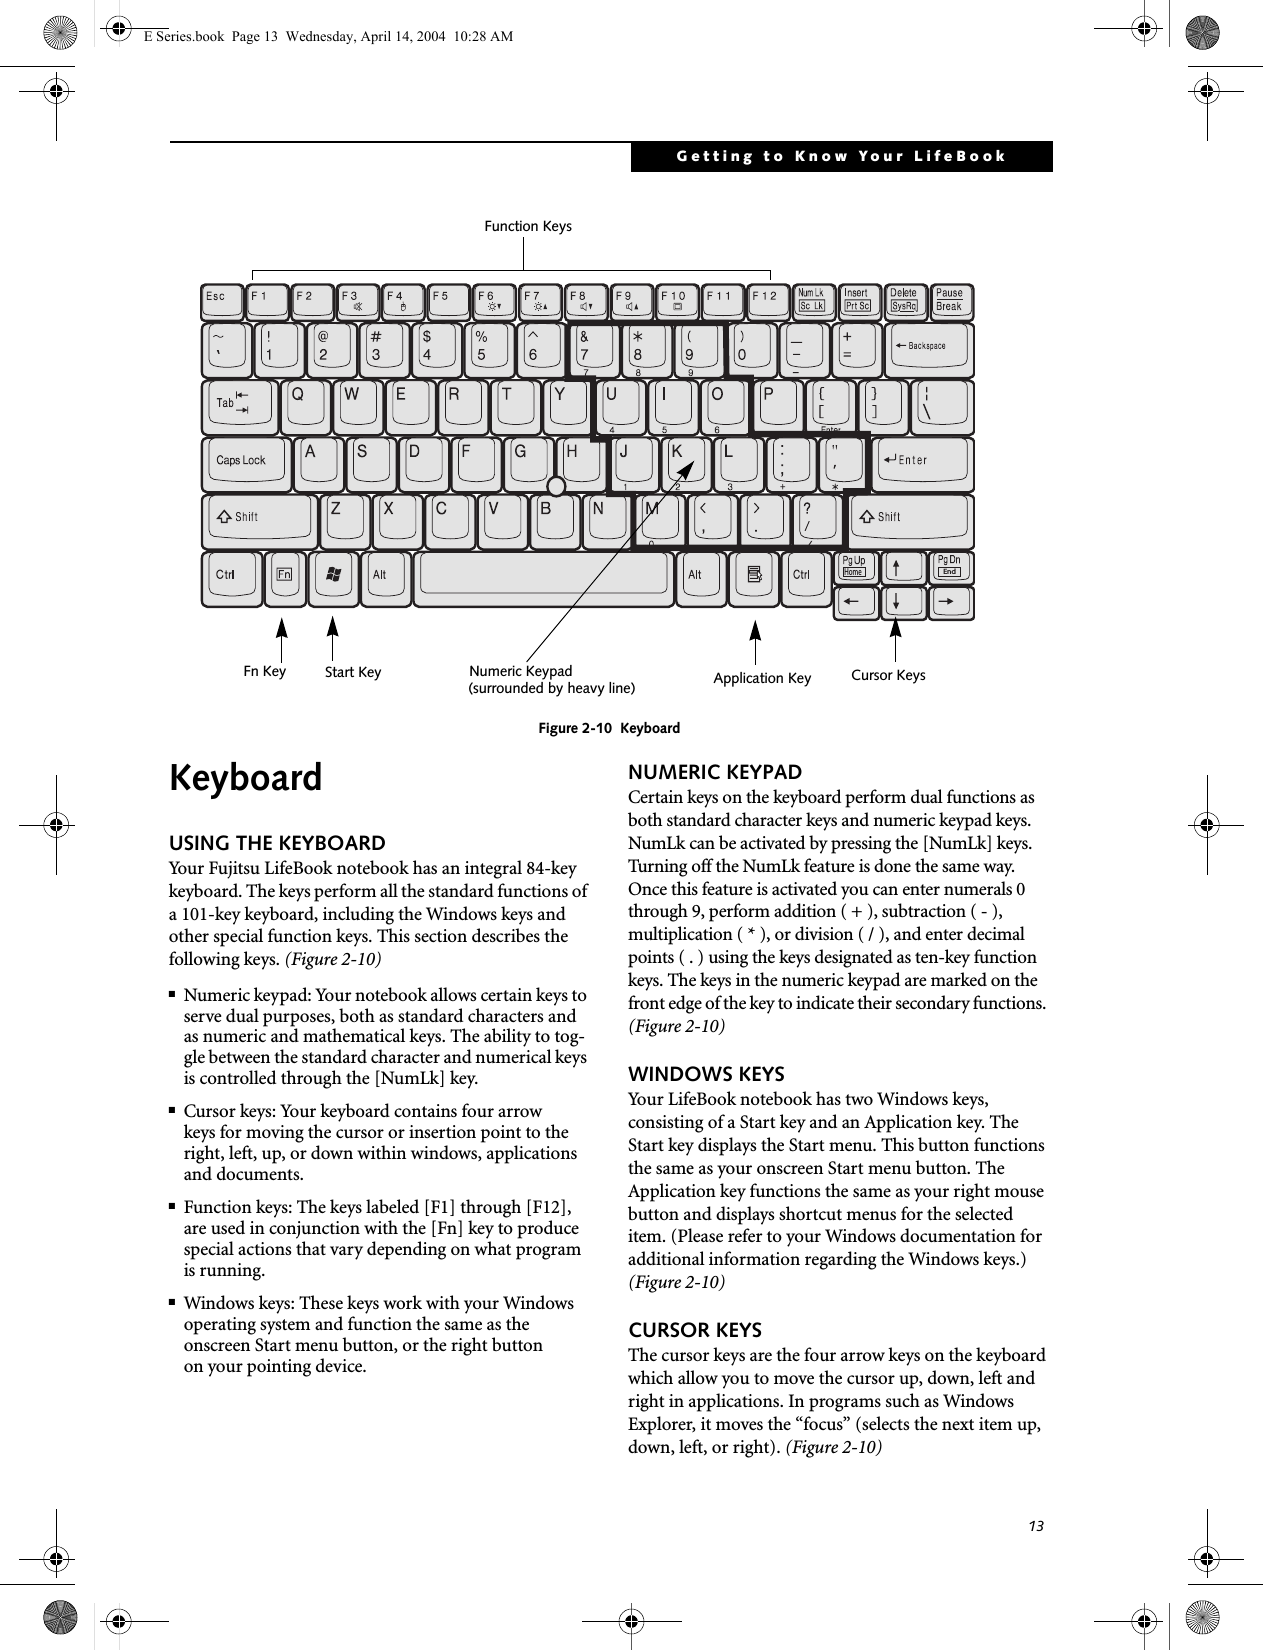 13Getting to Know Your LifeBookFigure 2-10  KeyboardKeyboard USING THE KEYBOARDYour Fujitsu LifeBook notebook has an integral 84-key keyboard. The keys perform all the standard functions of a 101-key keyboard, including the Windows keys and other special function keys. This section describes the following keys. (Figure 2-10)■Numeric keypad: Your notebook allows certain keys to serve dual purposes, both as standard characters and as numeric and mathematical keys. The ability to tog-gle between the standard character and numerical keys is controlled through the [NumLk] key.■Cursor keys: Your keyboard contains four arrowkeys for moving the cursor or insertion point to the right, left, up, or down within windows, applications and documents. ■Function keys: The keys labeled [F1] through [F12], are used in conjunction with the [Fn] key to produce special actions that vary depending on what program is running. ■Windows keys: These keys work with your Windows operating system and function the same as the onscreen Start menu button, or the right buttonon your pointing device.NUMERIC KEYPADCertain keys on the keyboard perform dual functions as both standard character keys and numeric keypad keys. NumLk can be activated by pressing the [NumLk] keys. Turning off the NumLk feature is done the same way. Once this feature is activated you can enter numerals 0 through 9, perform addition ( + ), subtraction ( - ),multiplication ( * ), or division ( / ), and enter decimal points ( . ) using the keys designated as ten-key function keys. The keys in the numeric keypad are marked on the front edge of the key to indicate their secondary functions. (Figure 2-10) WINDOWS KEYSYour LifeBook notebook has two Windows keys, consisting of a Start key and an Application key. The Start key displays the Start menu. This button functions the same as your onscreen Start menu button. The Application key functions the same as your right mouse button and displays shortcut menus for the selected item. (Please refer to your Windows documentation for additional information regarding the Windows keys.) (Figure 2-10)CURSOR KEYSThe cursor keys are the four arrow keys on the keyboard which allow you to move the cursor up, down, left and right in applications. In programs such as Windows Explorer, it moves the “focus” (selects the next item up, down, left, or right). (Figure 2-10)EndHomeFn Key Start KeyFunction KeysNumeric Keypad Application Key Cursor Keys(surrounded by heavy line) E Series.book  Page 13  Wednesday, April 14, 2004  10:28 AM